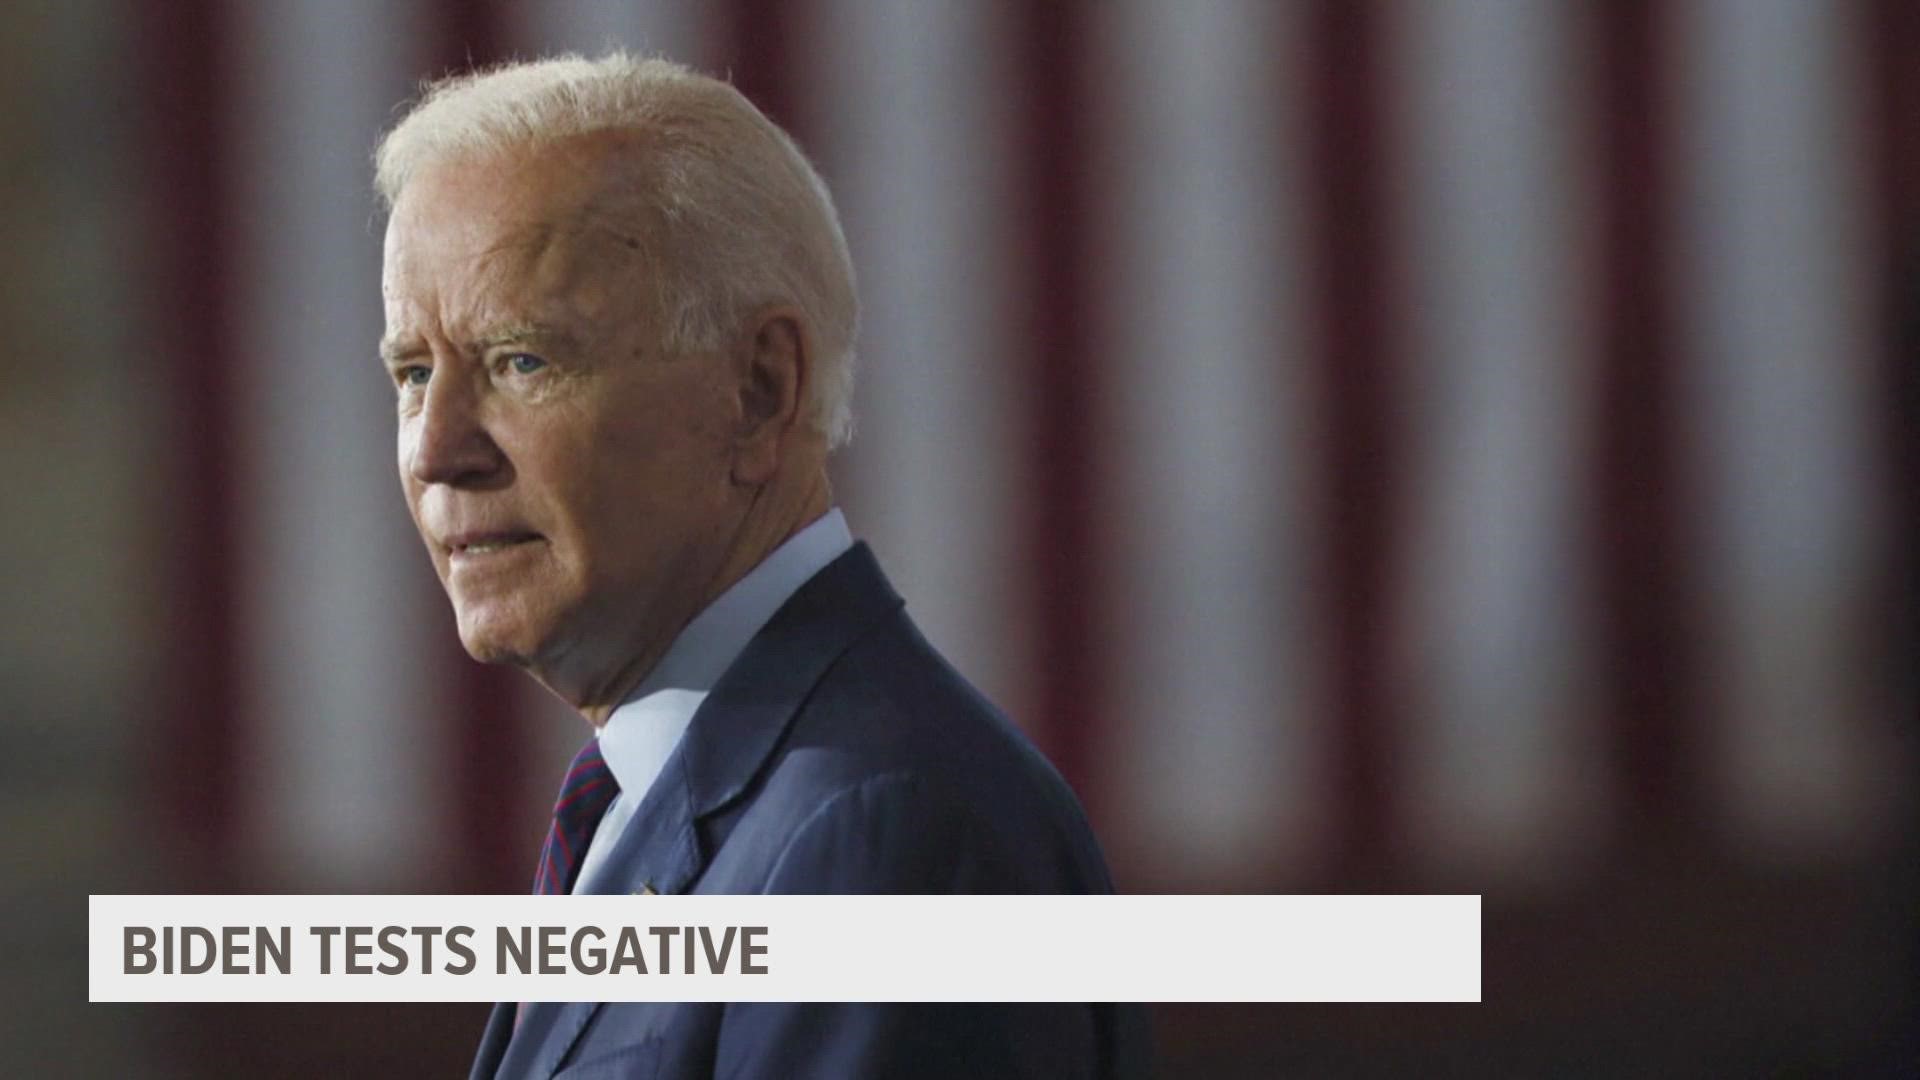 While President Biden said that "COVID isn't gone," he stressed that Americans can avoid serious illness with vaccines and available treatments.